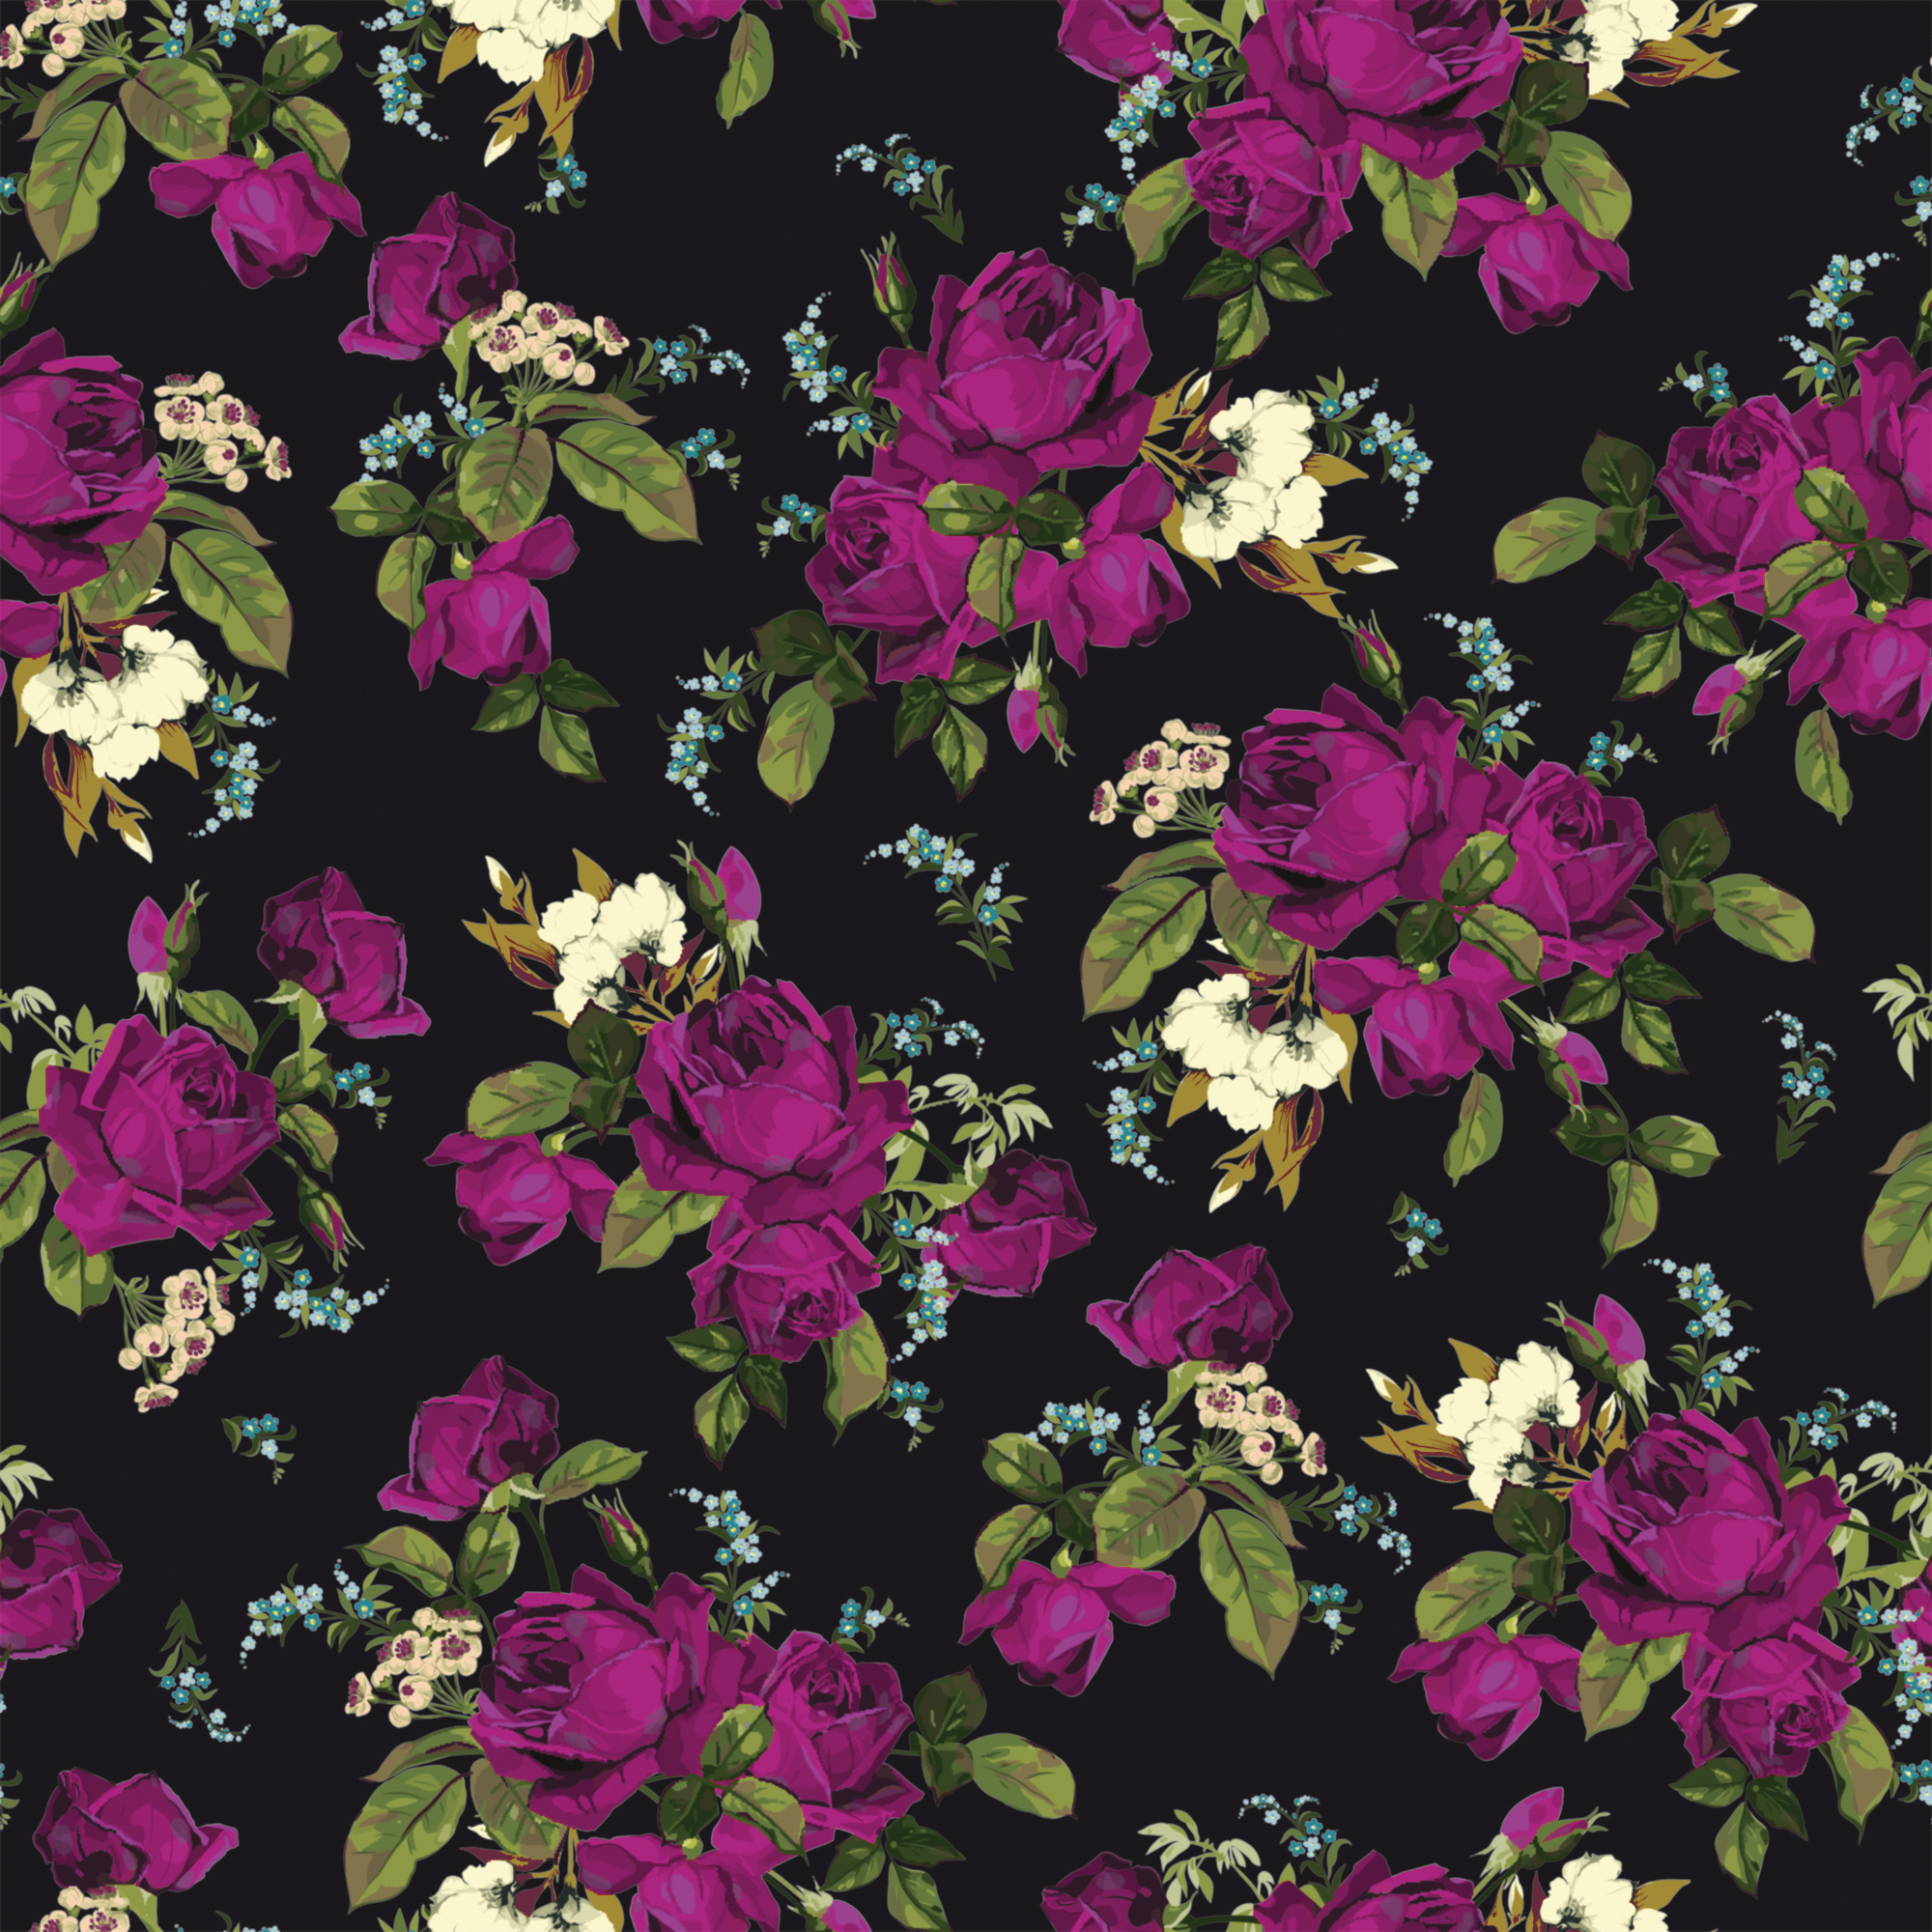 Free download floral pattern rose print texture background flowers